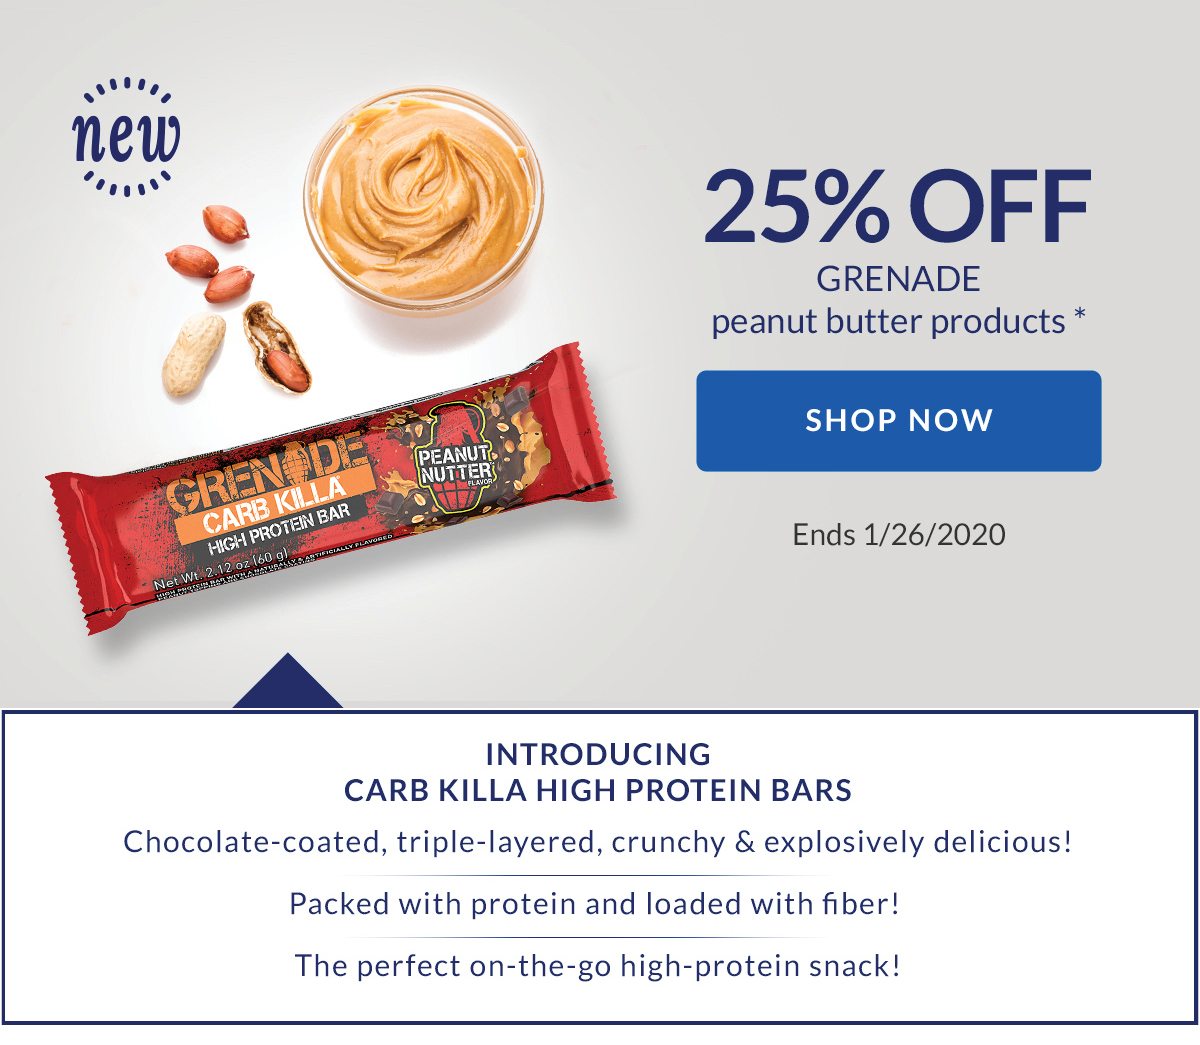 25% OFF GRENADE peanut butter products * | SHOP NOW | Ends 1/26/2020 | INTRODUCING CARB KILLA HIGH PROTEIN BARS | Chocolate-coated, triple-layered, crunchy & explosively delicious! | Packed with protein and loaded with fiber! | The perfect on-the-go high-protein snack!